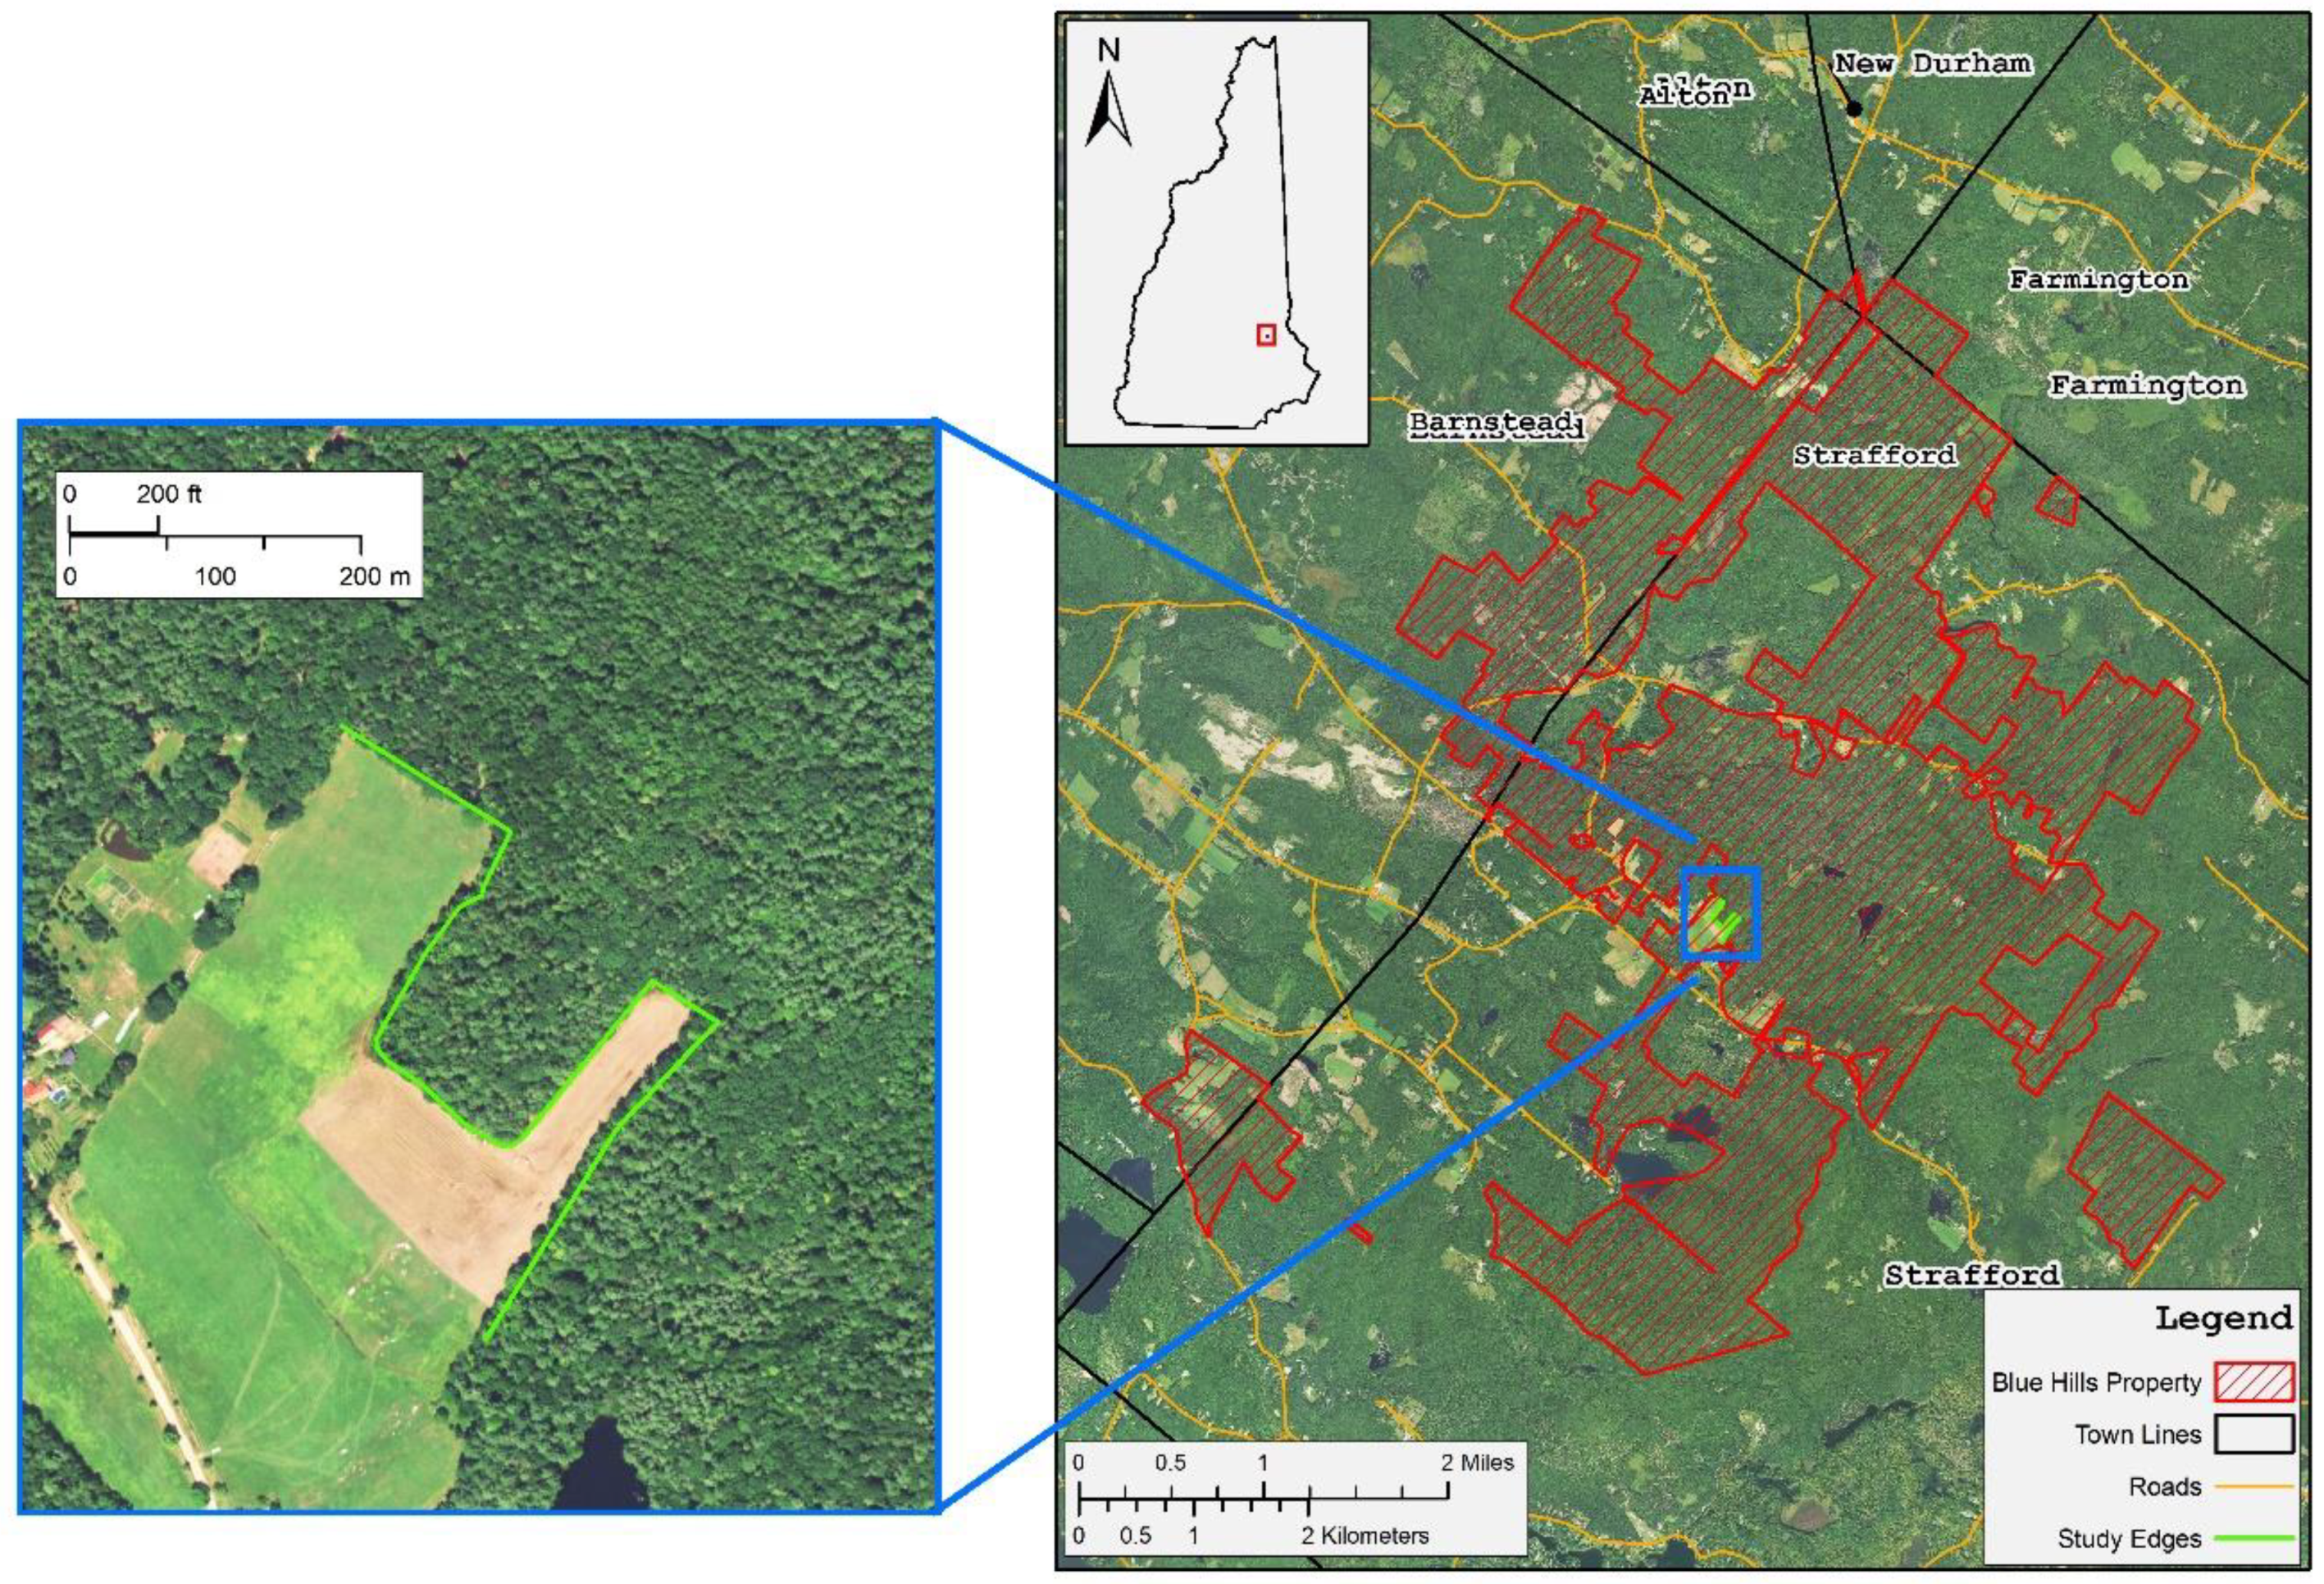 Thumbnail for Evaluating the Capability of Unmanned Aerial System (UAS) Imagery to Detect and Measure the Effects of Edge Influence on Forest Canopy Cover in New England